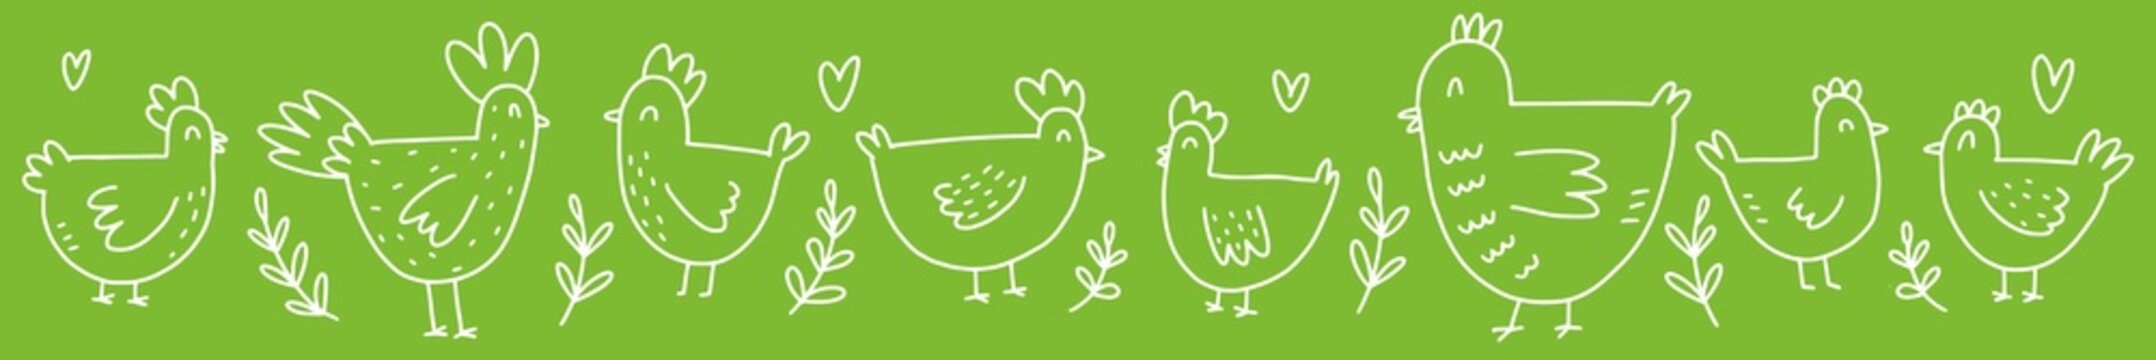 A hand-drawn set of cute chickens. Vector, children's illustration of farm birds drawn in the style of doodles.